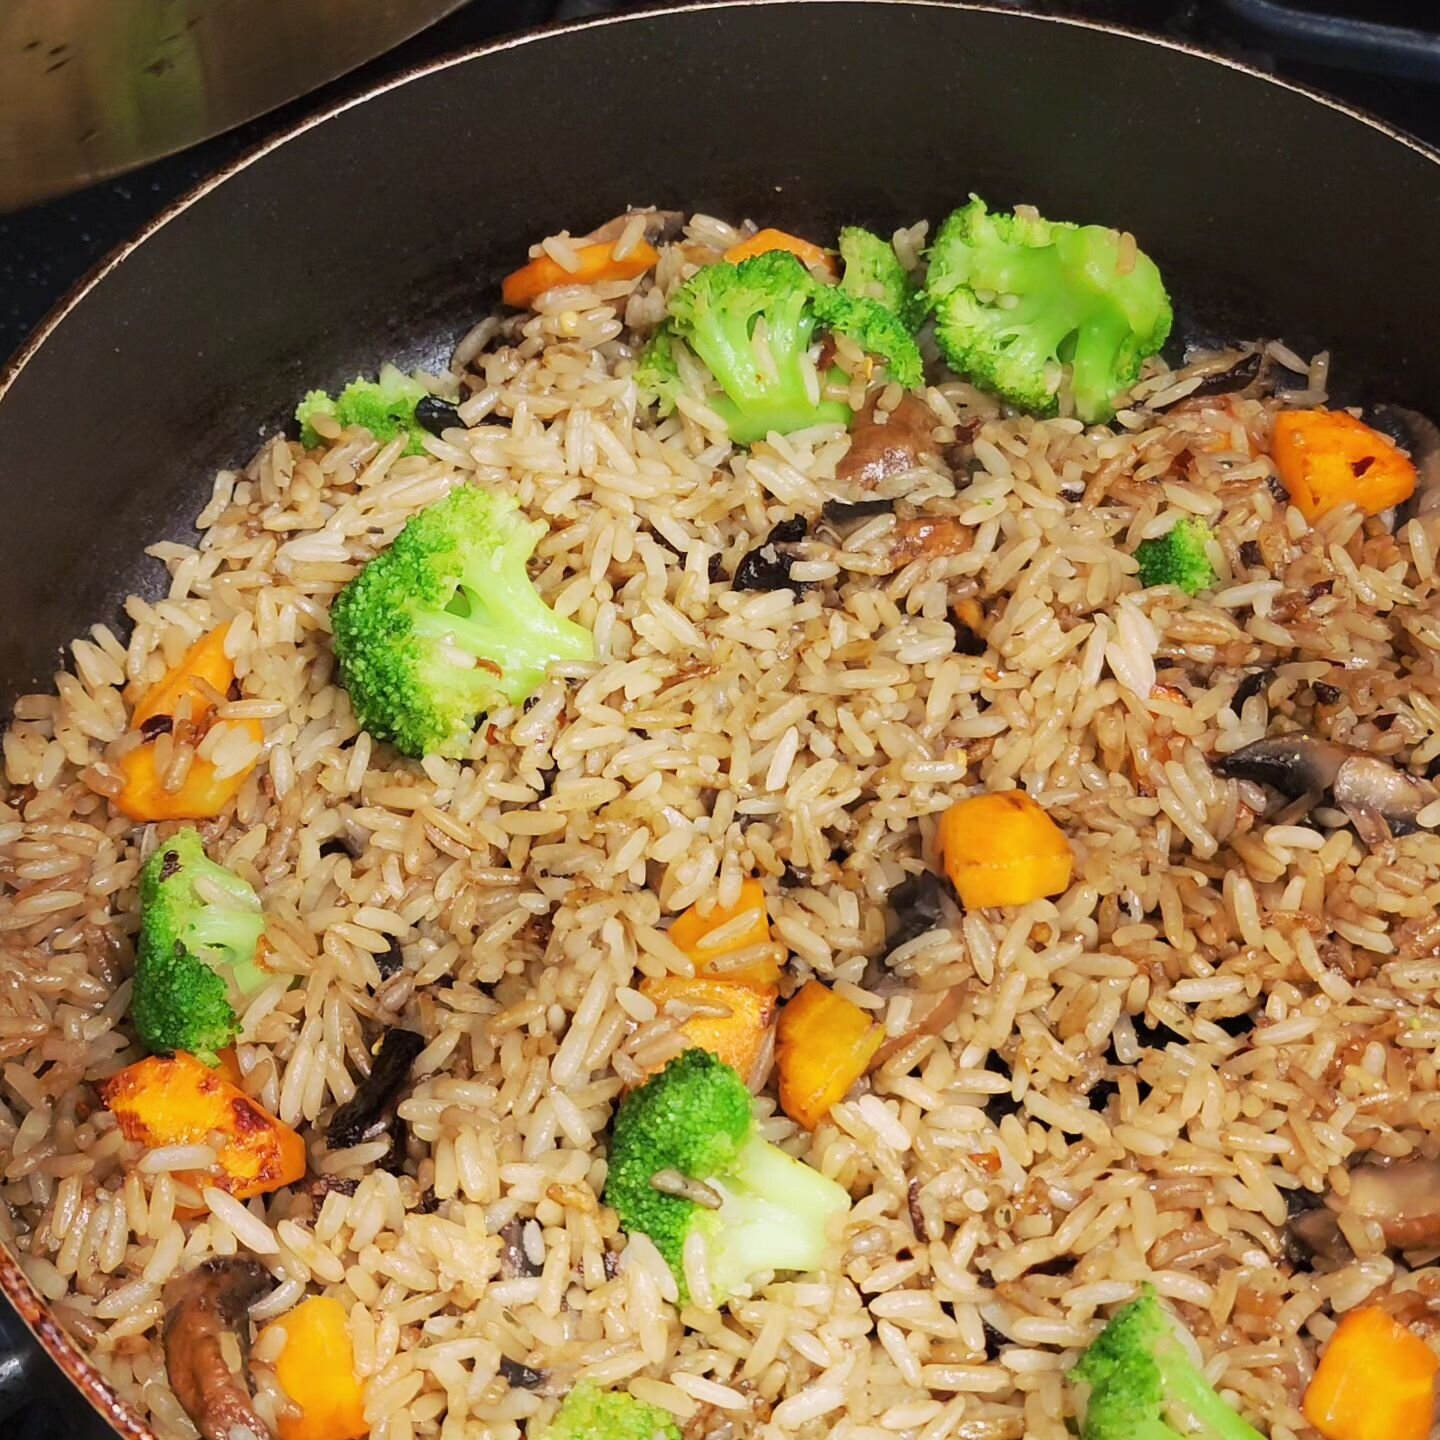 📢🚨*Easy Daniel Fast recipe!!*🚨📢

Simple &quot;Asian-inspired&quot; stir-fry:

5 cloves chopped garlic🧄
1 thumb fresh ginger, minced🫚
1/2 large carrot, cubed🥕
1/2 sliced onion🧅
Broccoli flourets (however many you like)🥦
Sliced mushrooms (as m